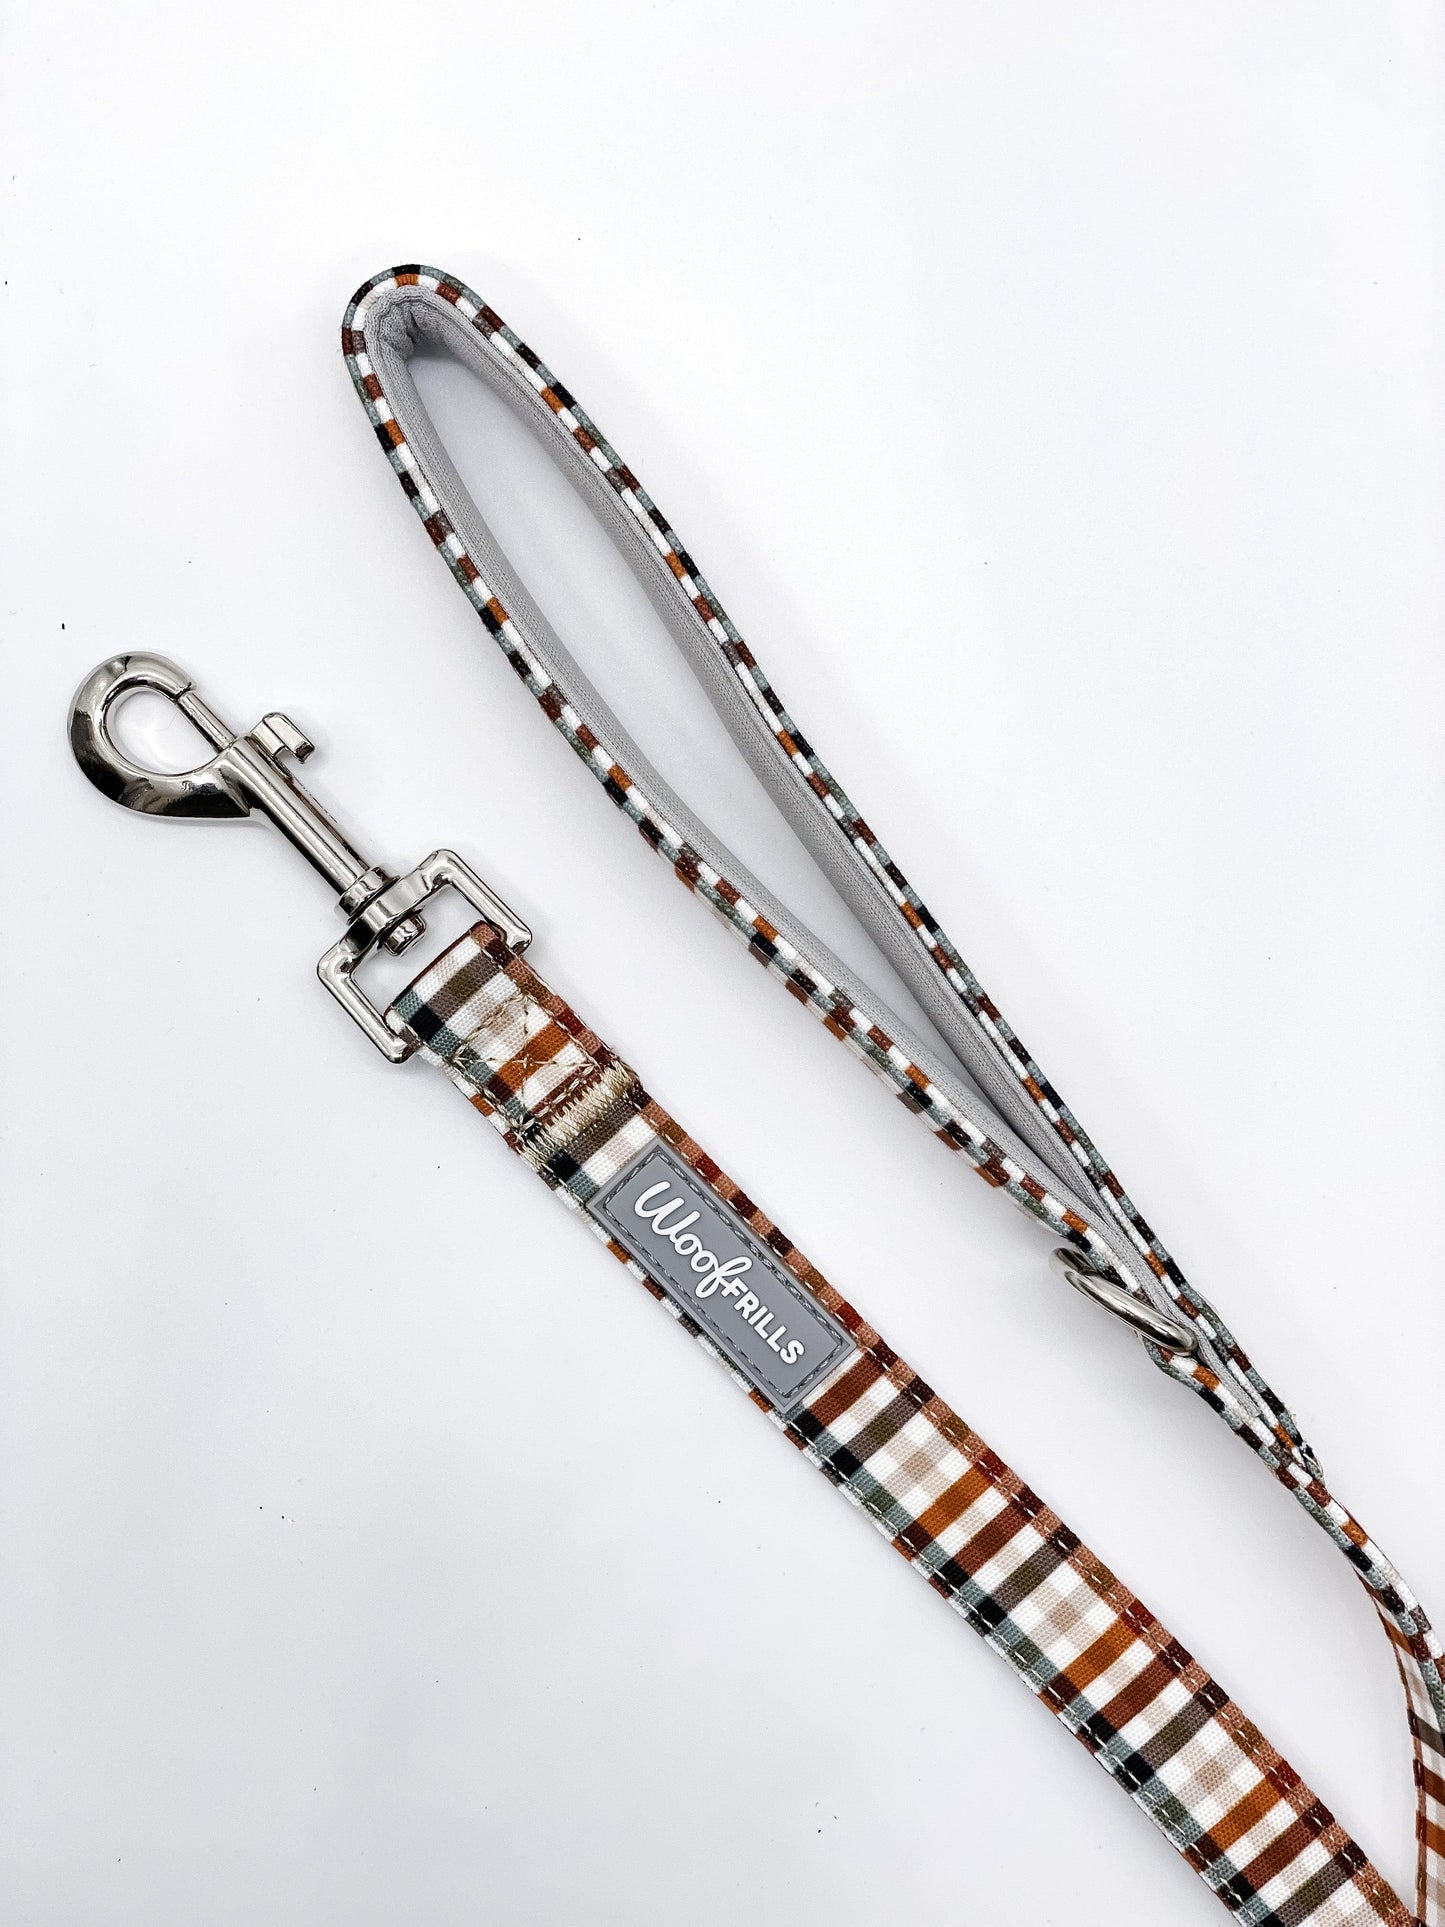 Strong dog lead with soft handle for extra comfort